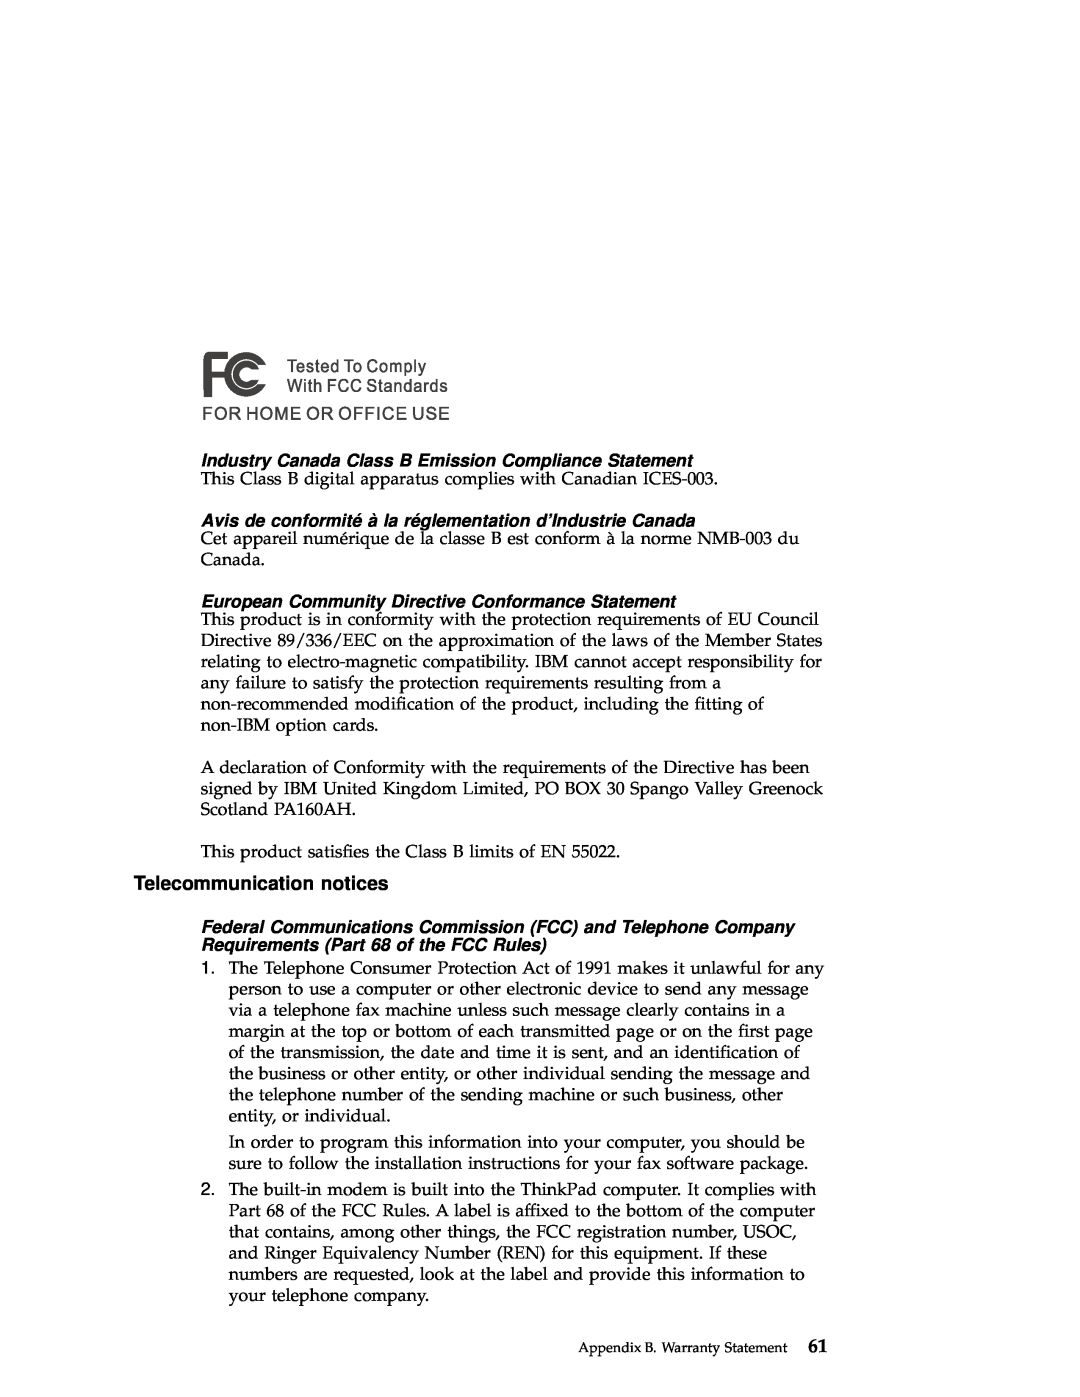 IBM A22 manual Telecommunication notices, Industry Canada Class B Emission Compliance Statement 